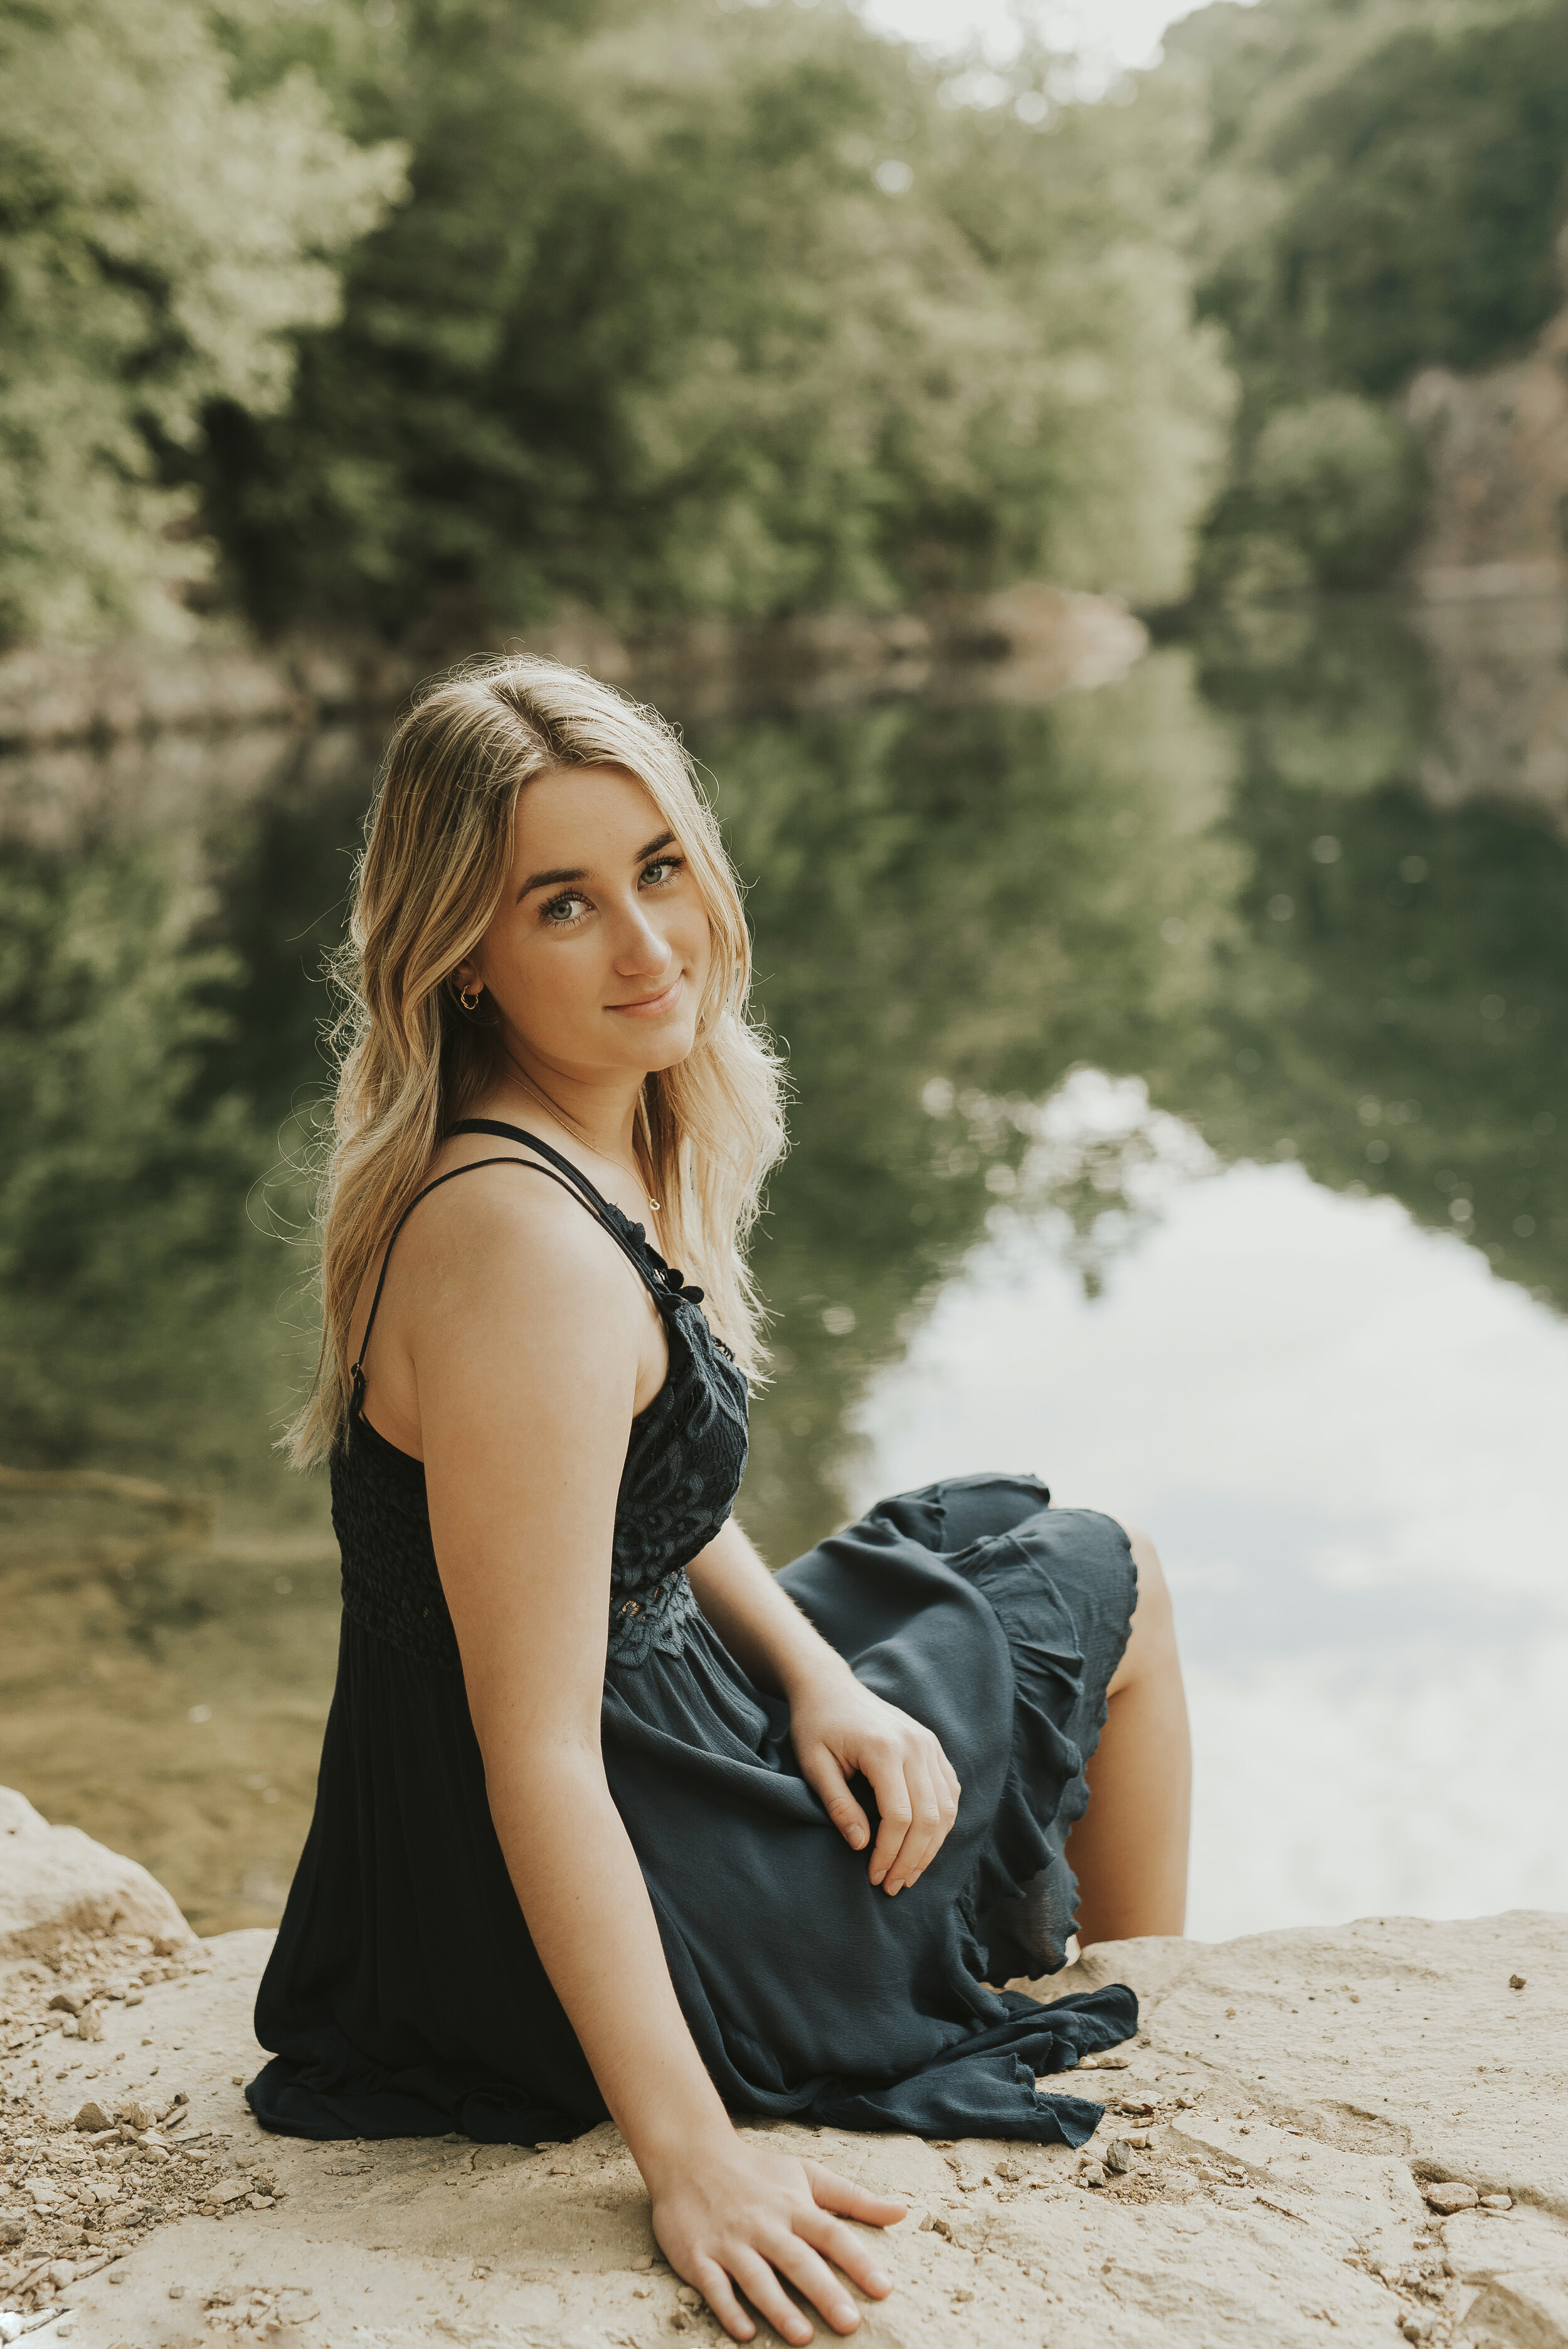 meads-quarry-knoxville-senior-photography-knoxville-photographer